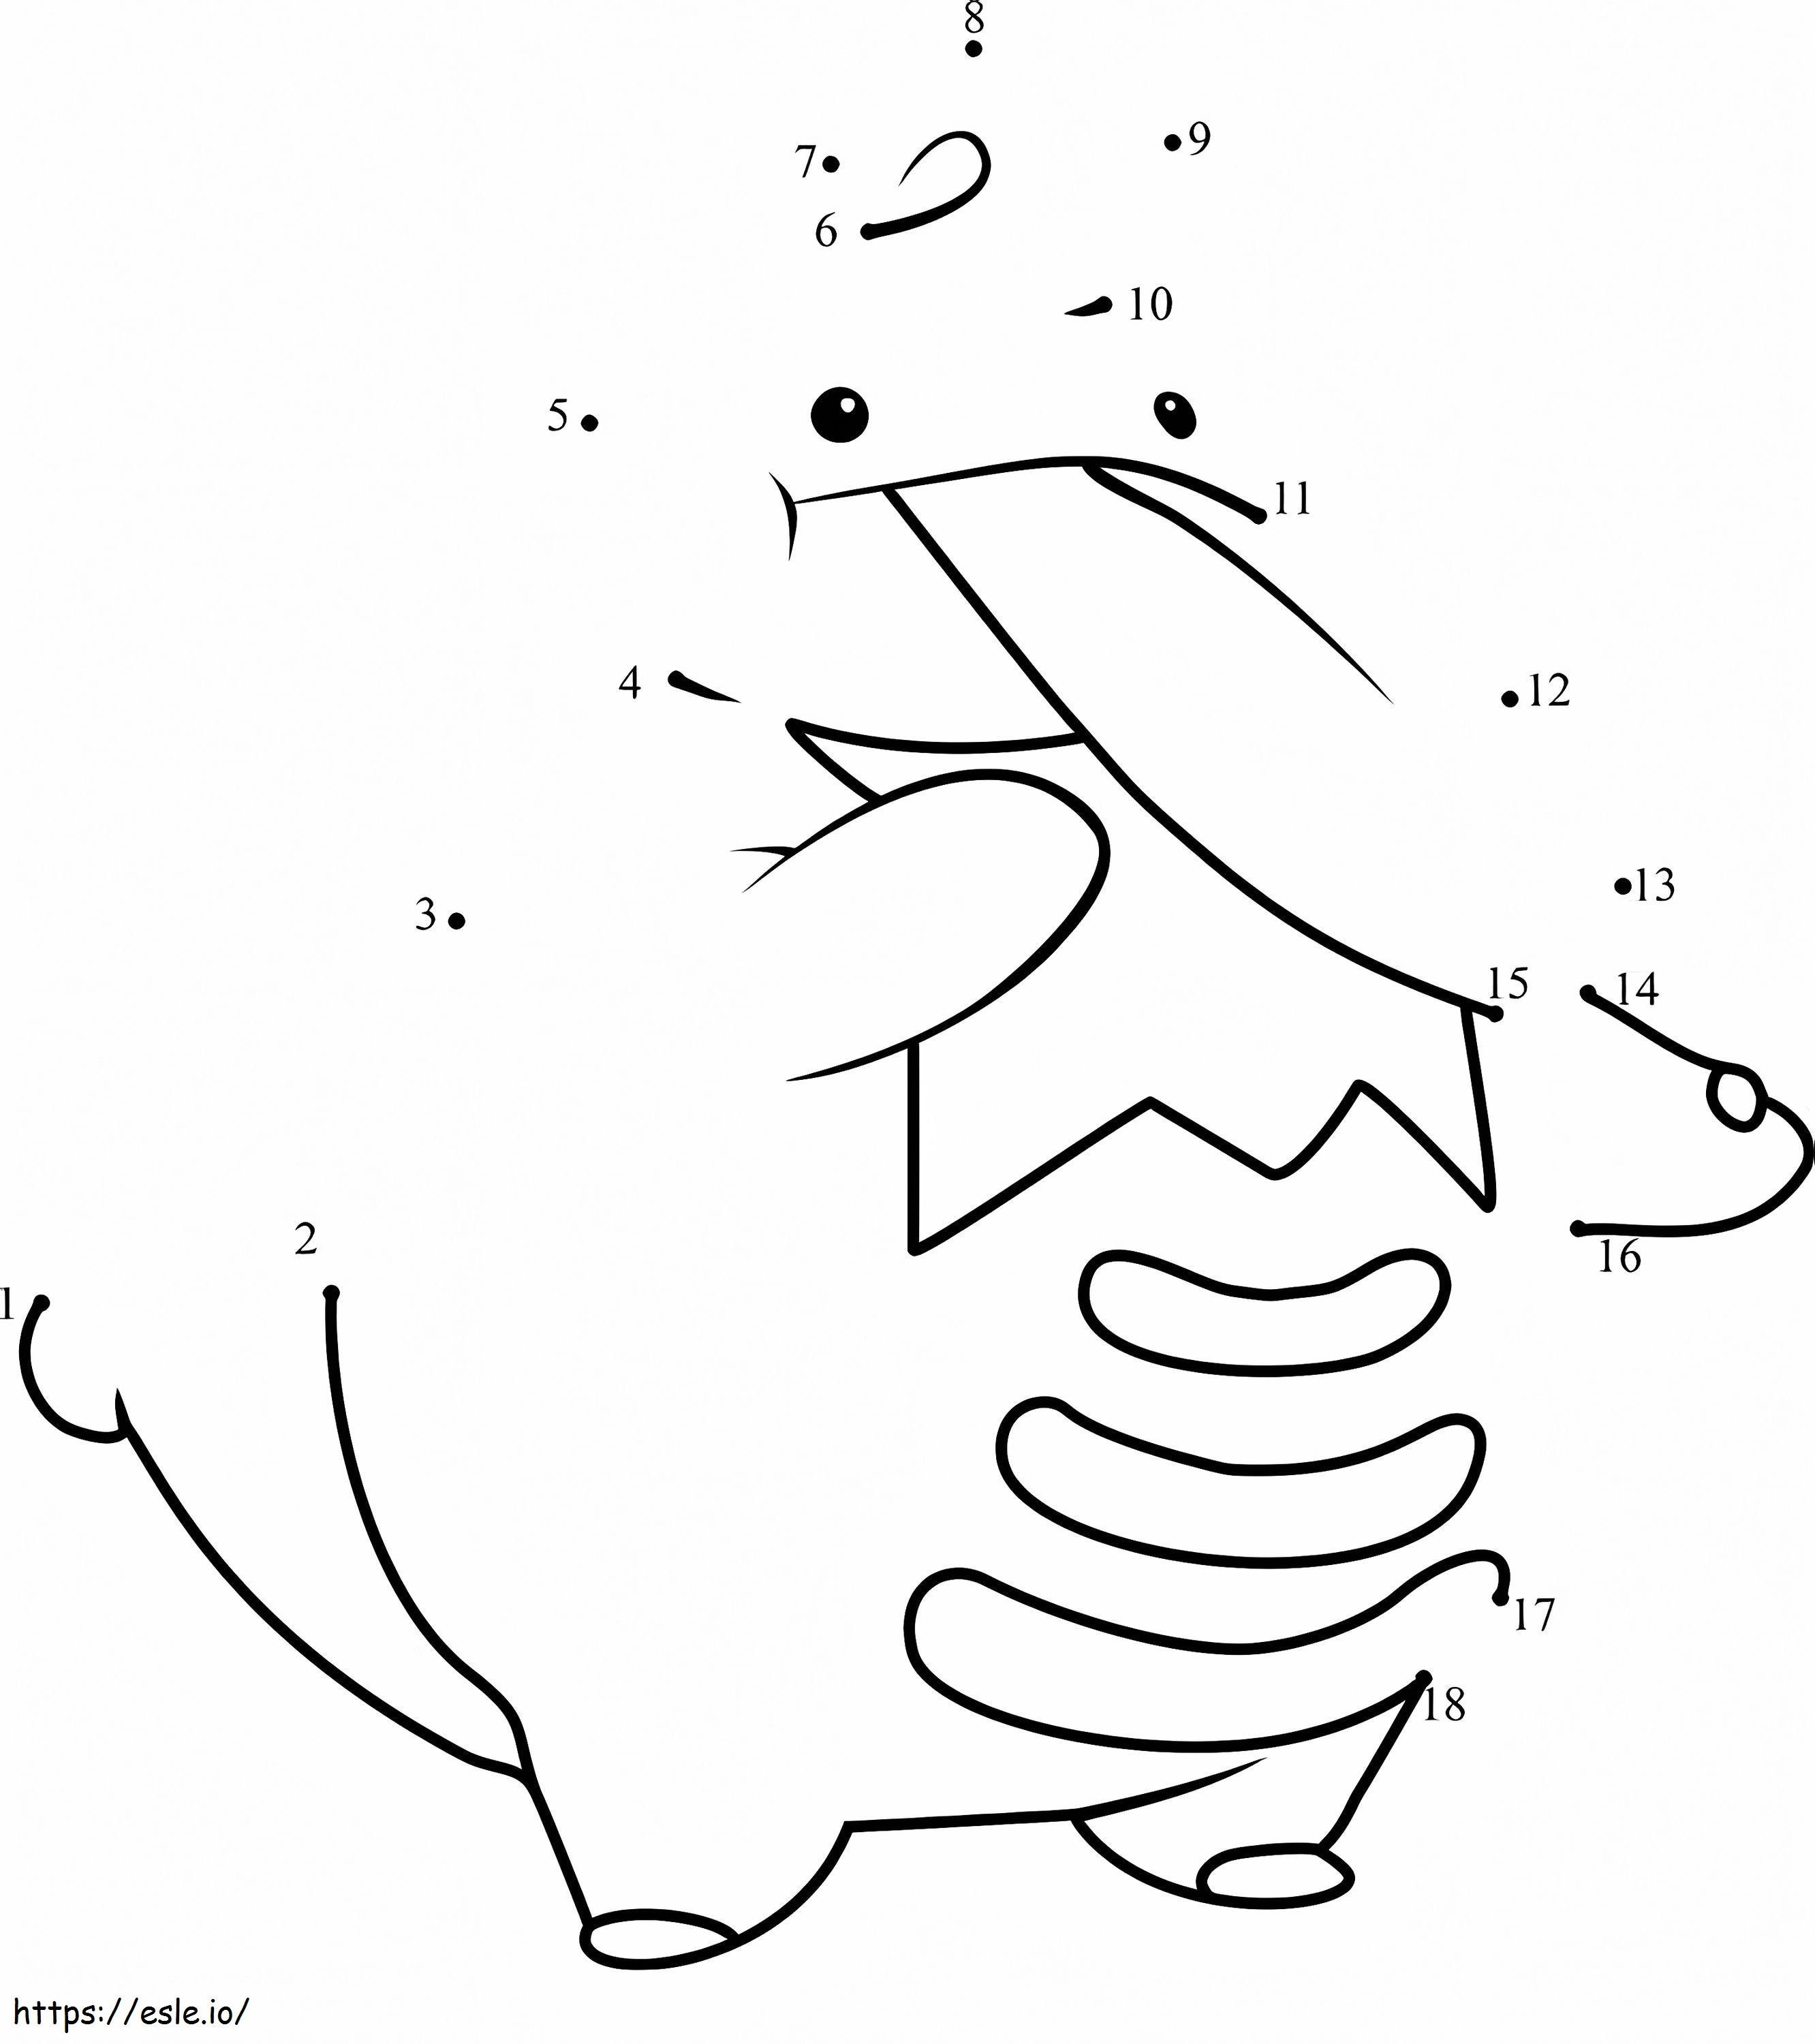 Lickilicky Dot To Dot Coloring Page coloring page